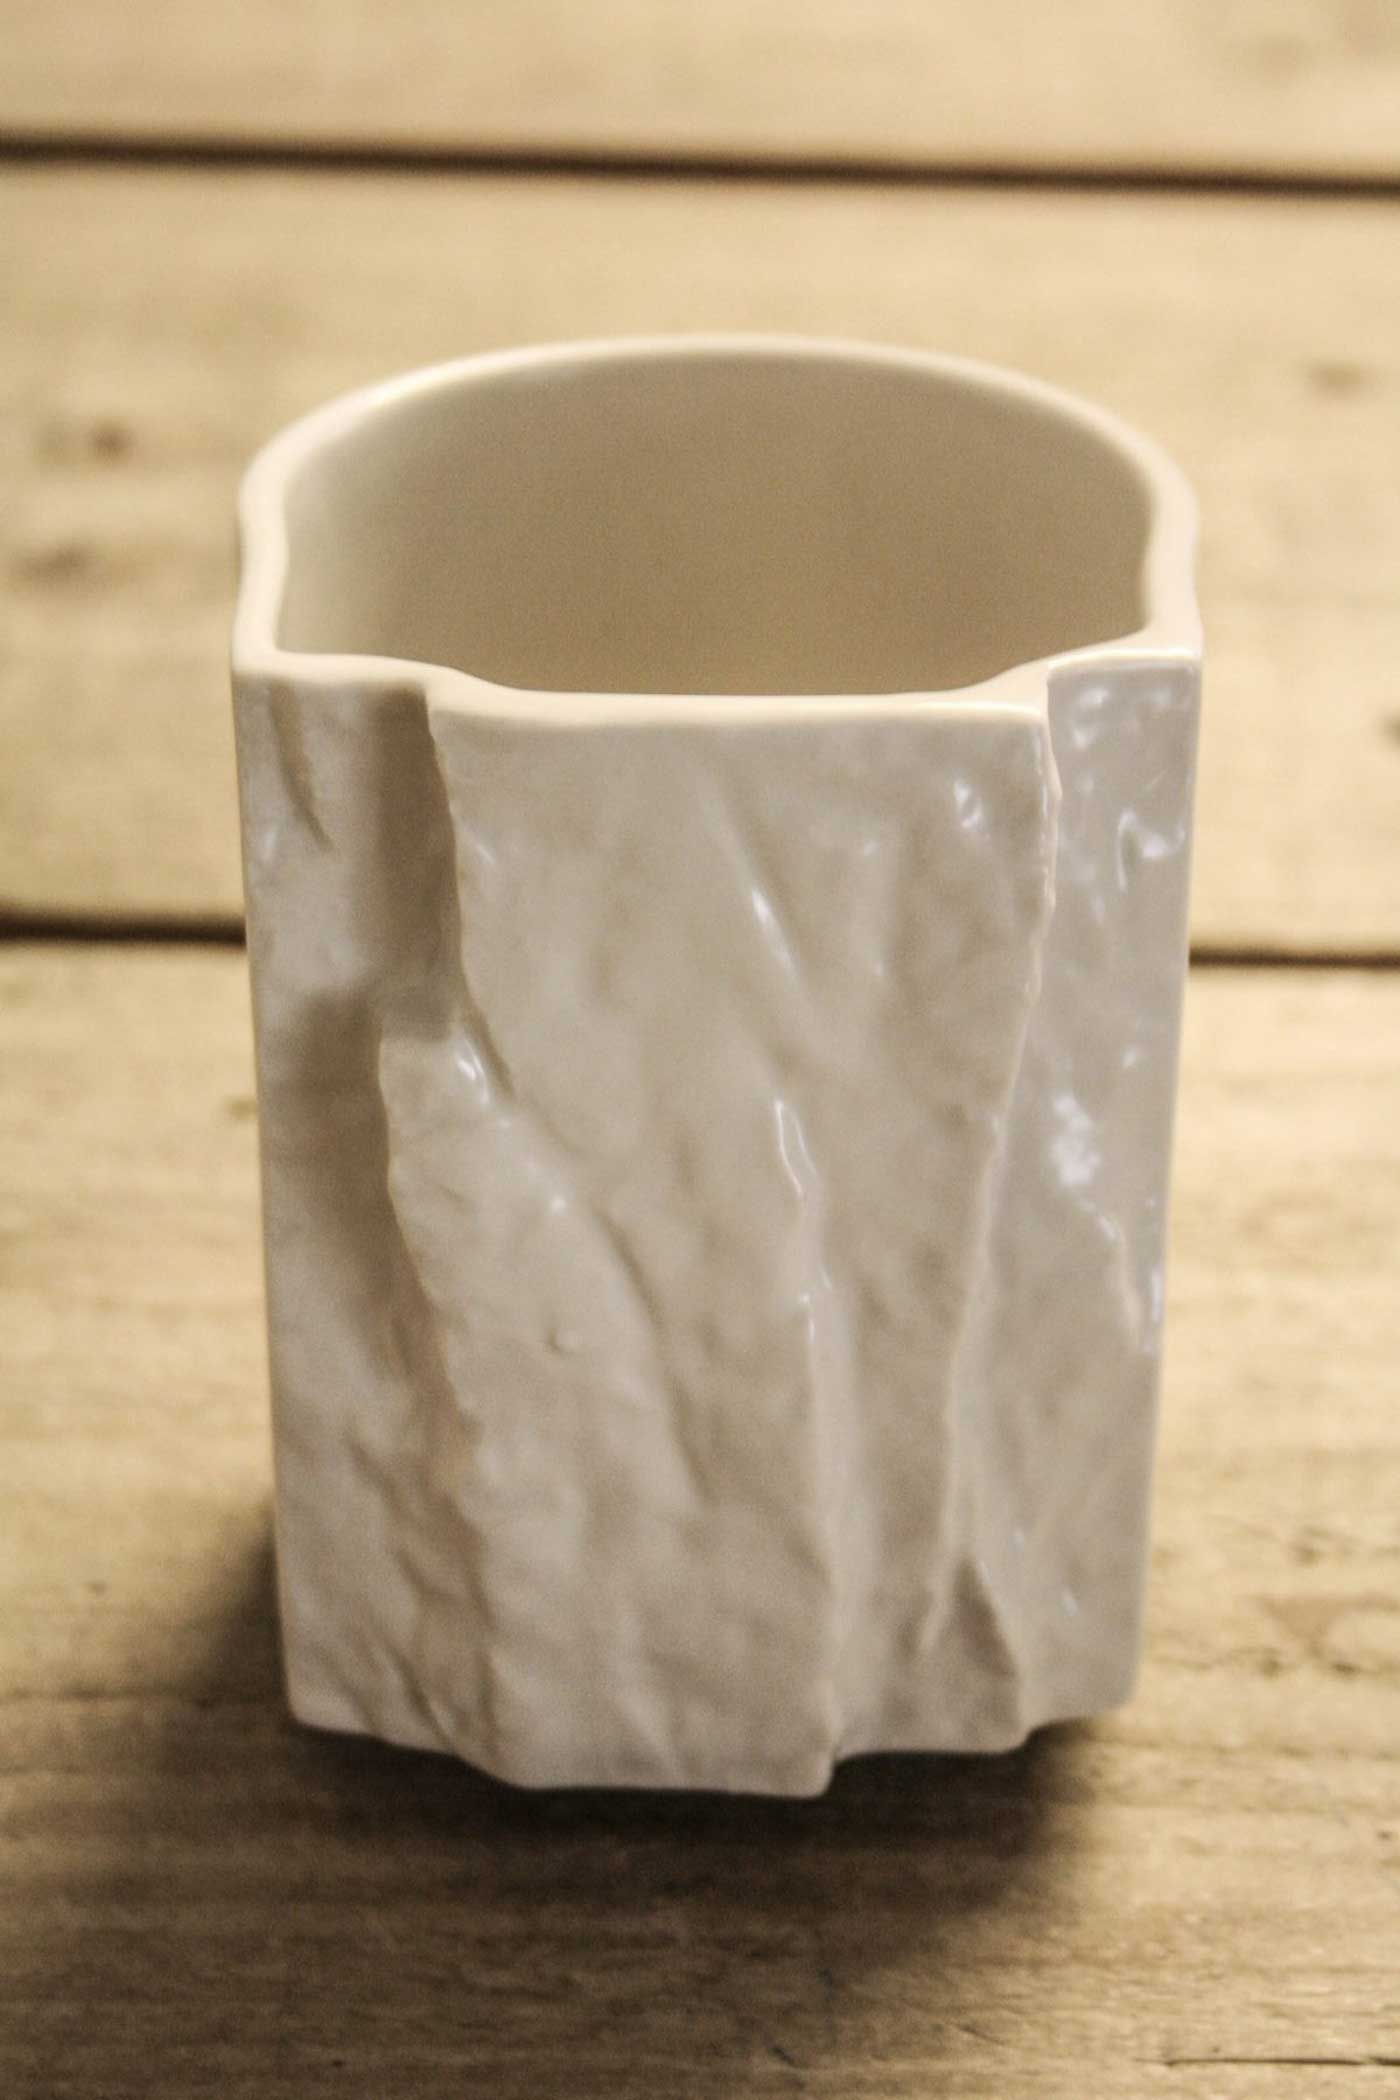 Pinch Hold Mug – Restful exercise for climbers.